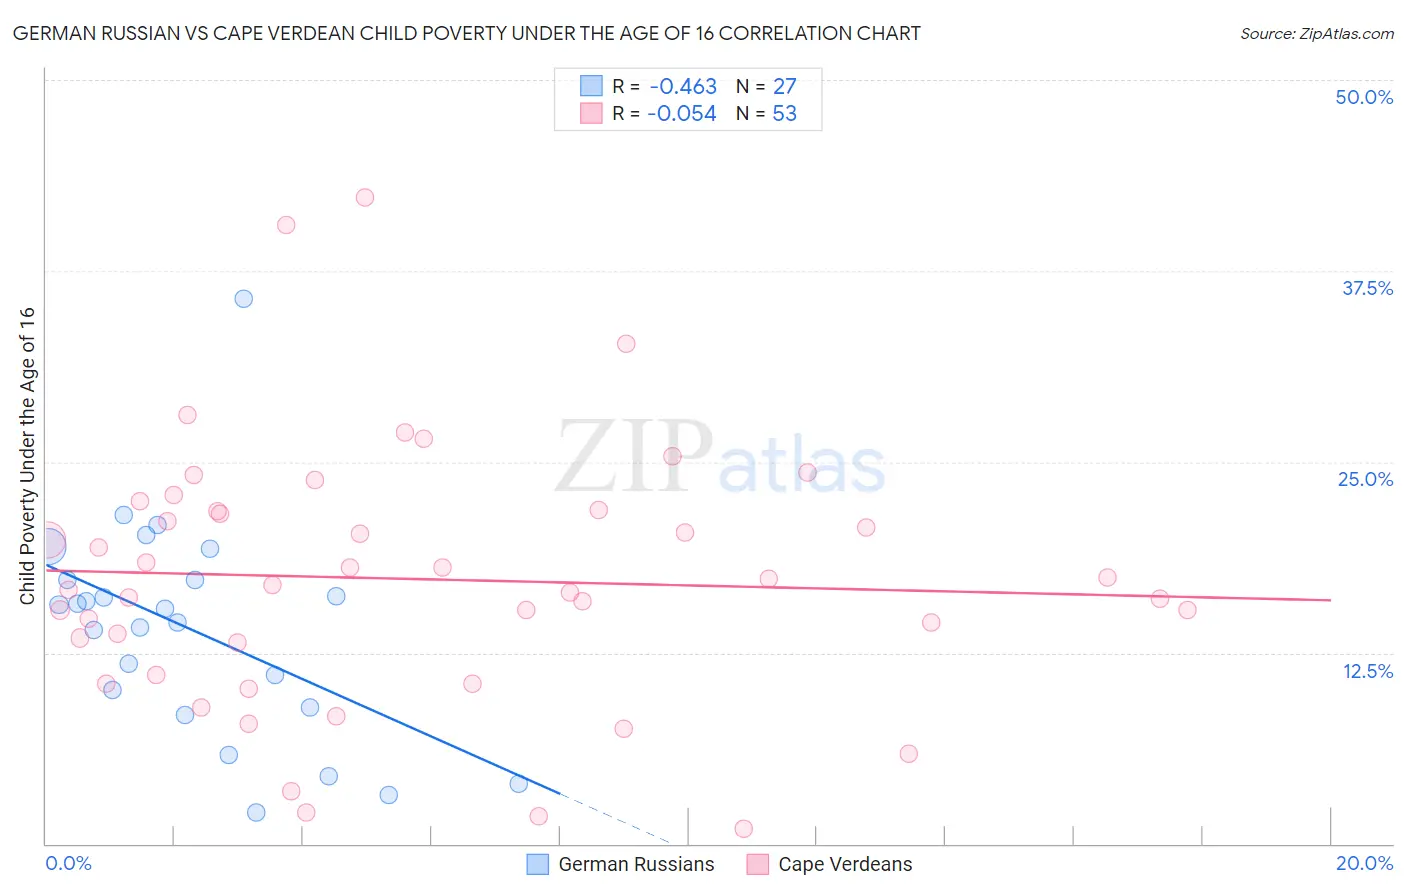 German Russian vs Cape Verdean Child Poverty Under the Age of 16